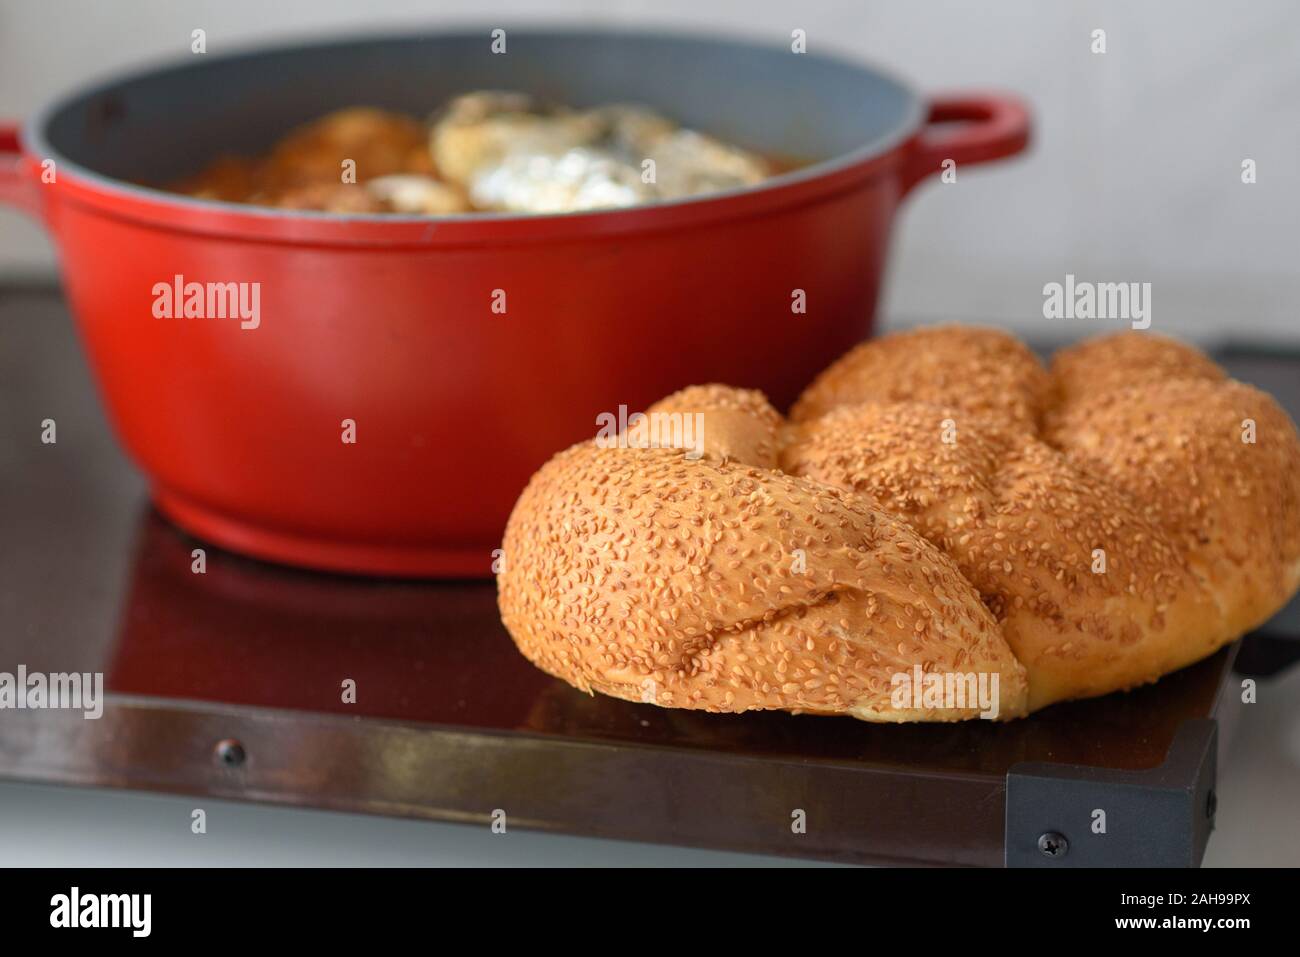 https://c8.alamy.com/comp/2AH99PX/hot-plate-for-the-sabbath-a-pot-of-spicy-meat-cooked-with-potatoes-barleys-wheat-and-eggs-pot-of-cholent-hamin-in-hebrew-challah-special-bread-in-jewish-cuisine-traditional-food-jewish-shabbat-2AH99PX.jpg